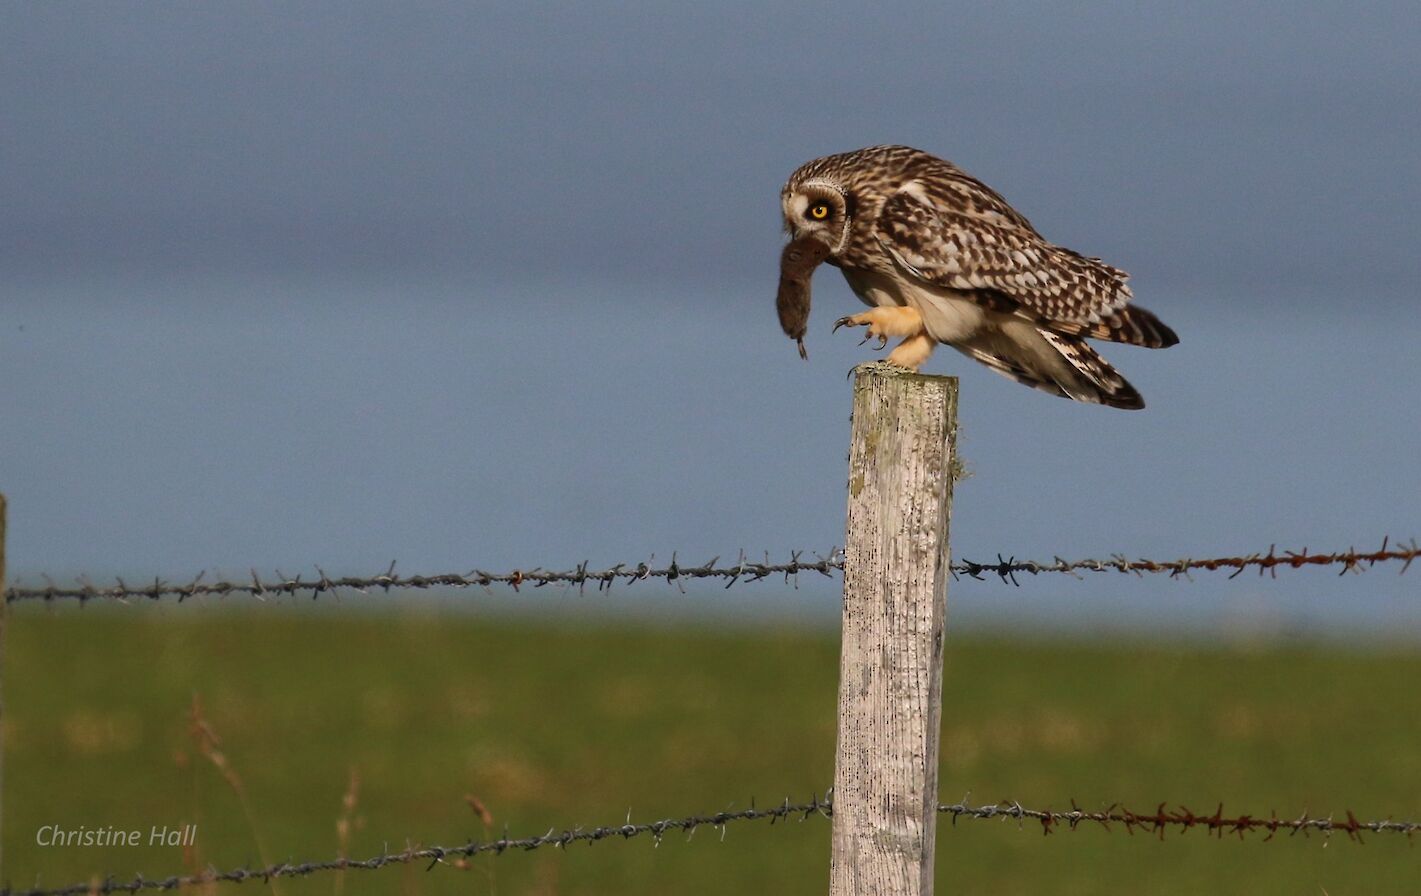 Short-eared owl with its catch in Eday - image by Christine Hall